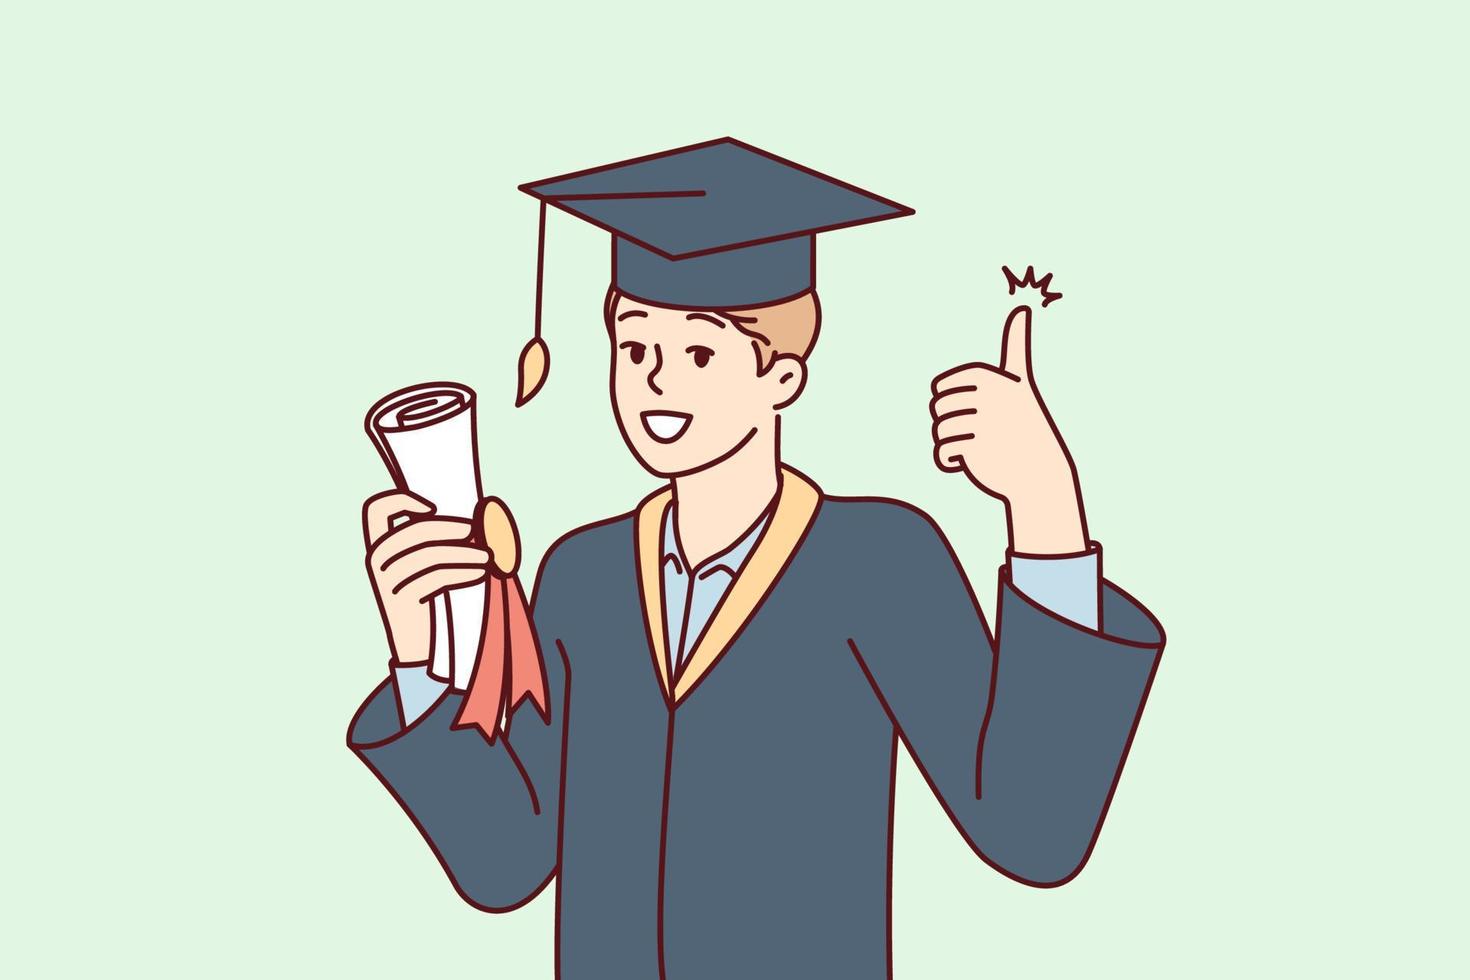 Graduate guy in academic gown and hat holds bundle with diploma and shows thumbs up. University student rejoices in getting quality education in good educational institution. Flat vector illustration